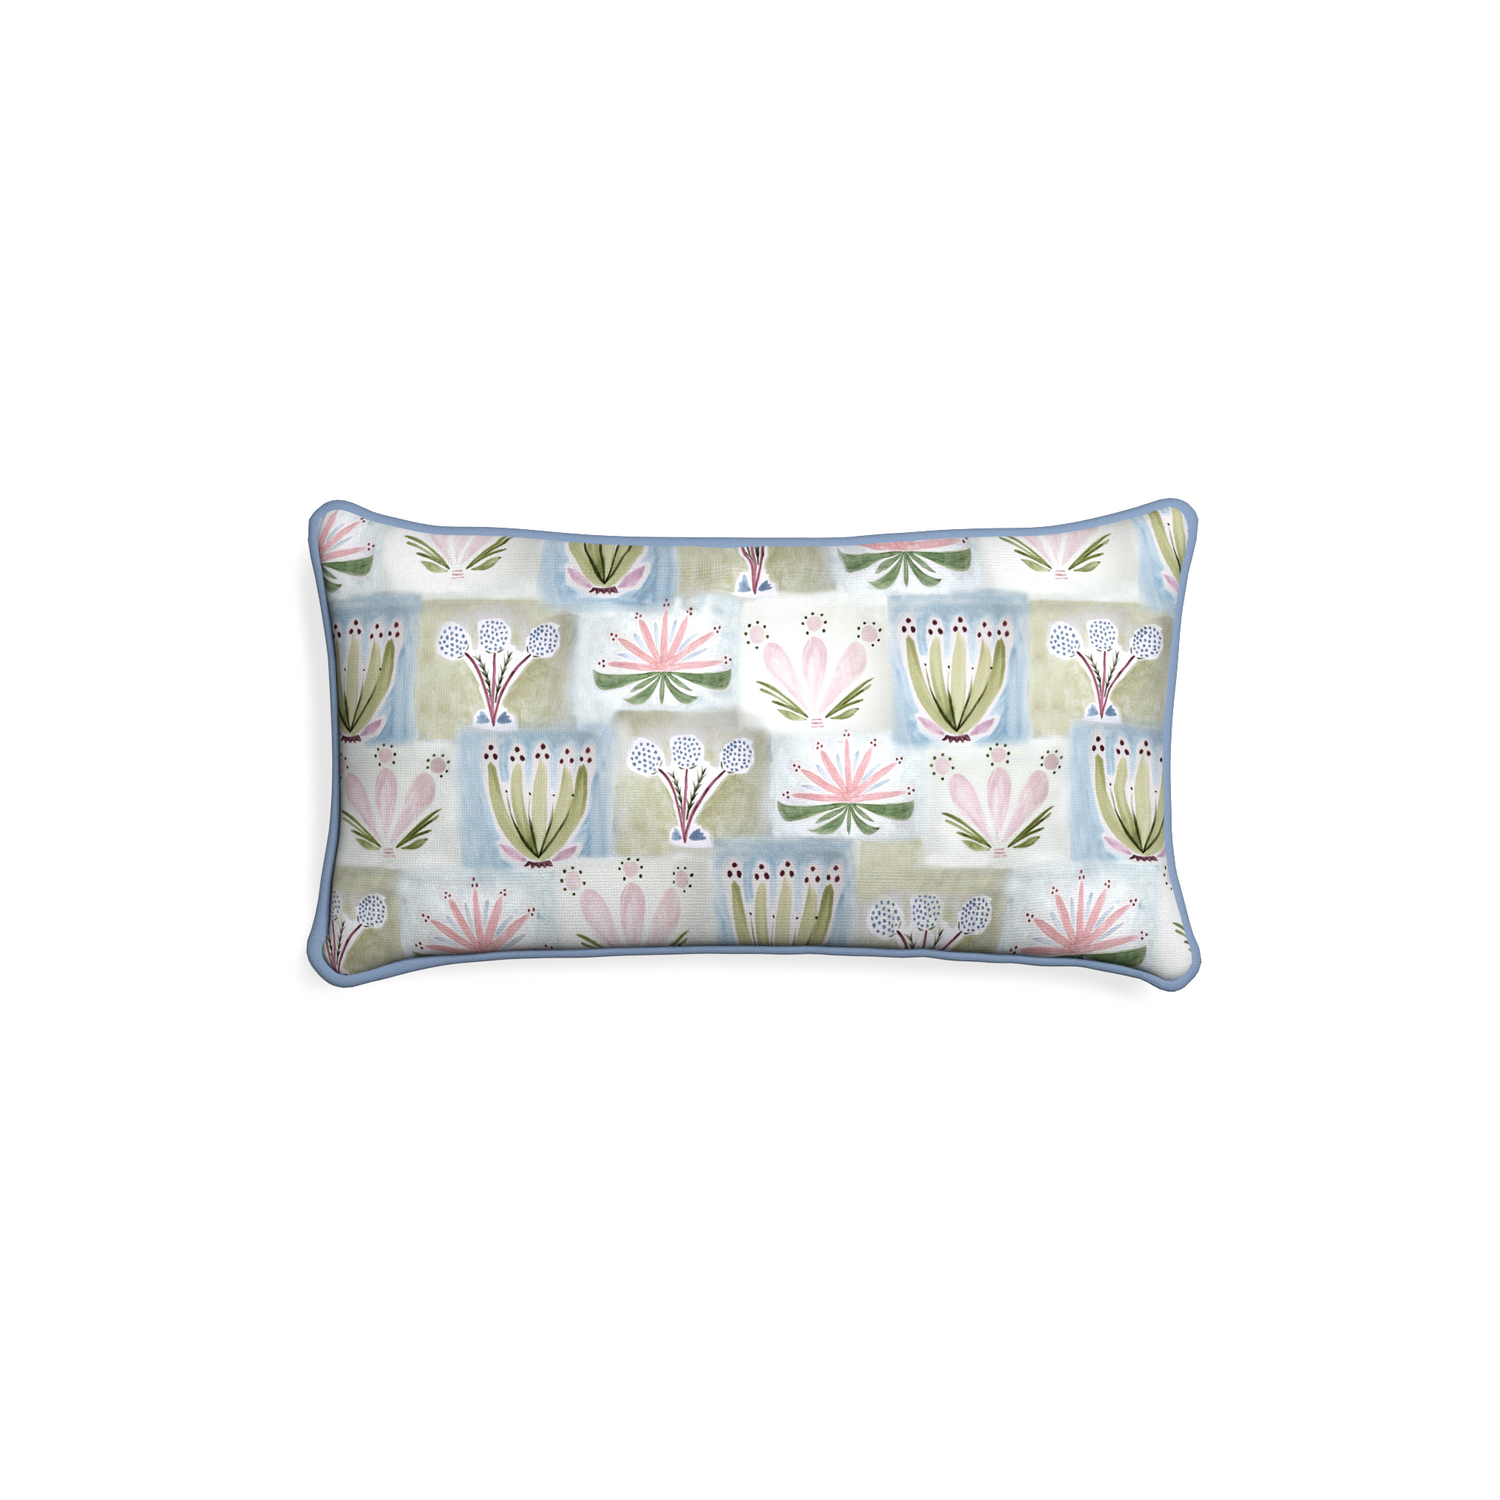 Petite-lumbar harper custom hand-painted floralpillow with sky piping on white background